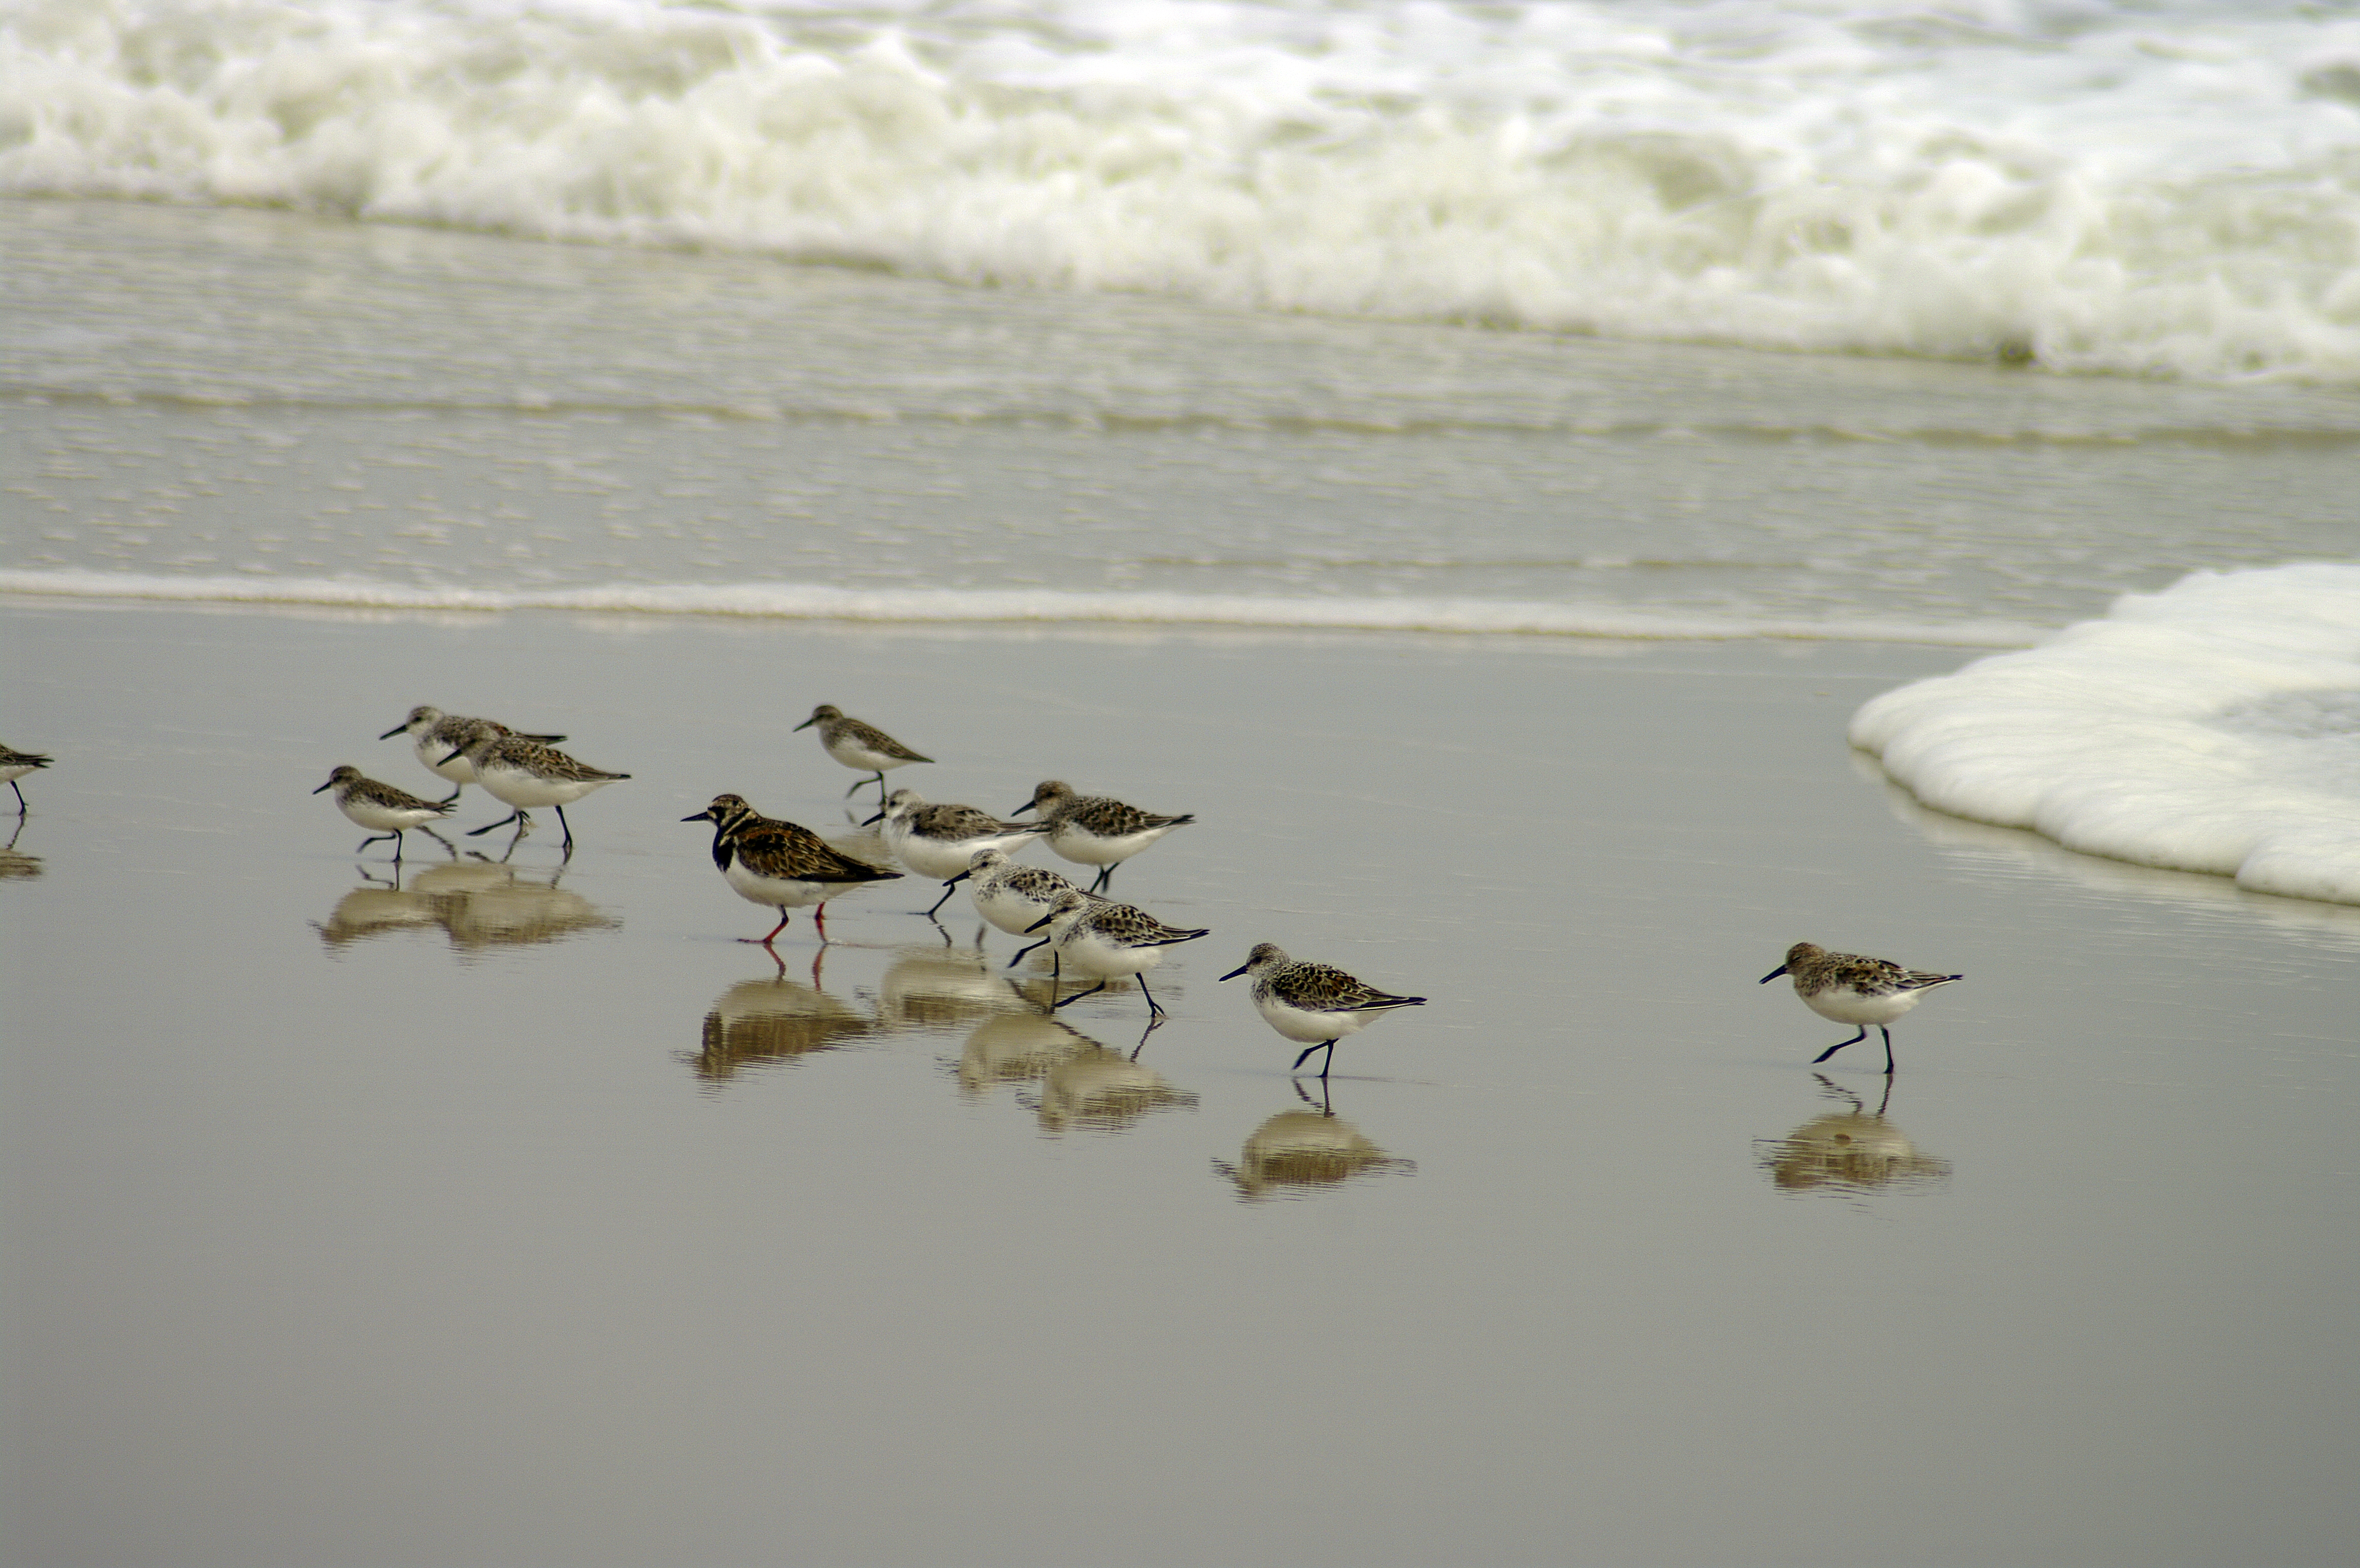 A flock of shorebirds stands on the beach near the waves.